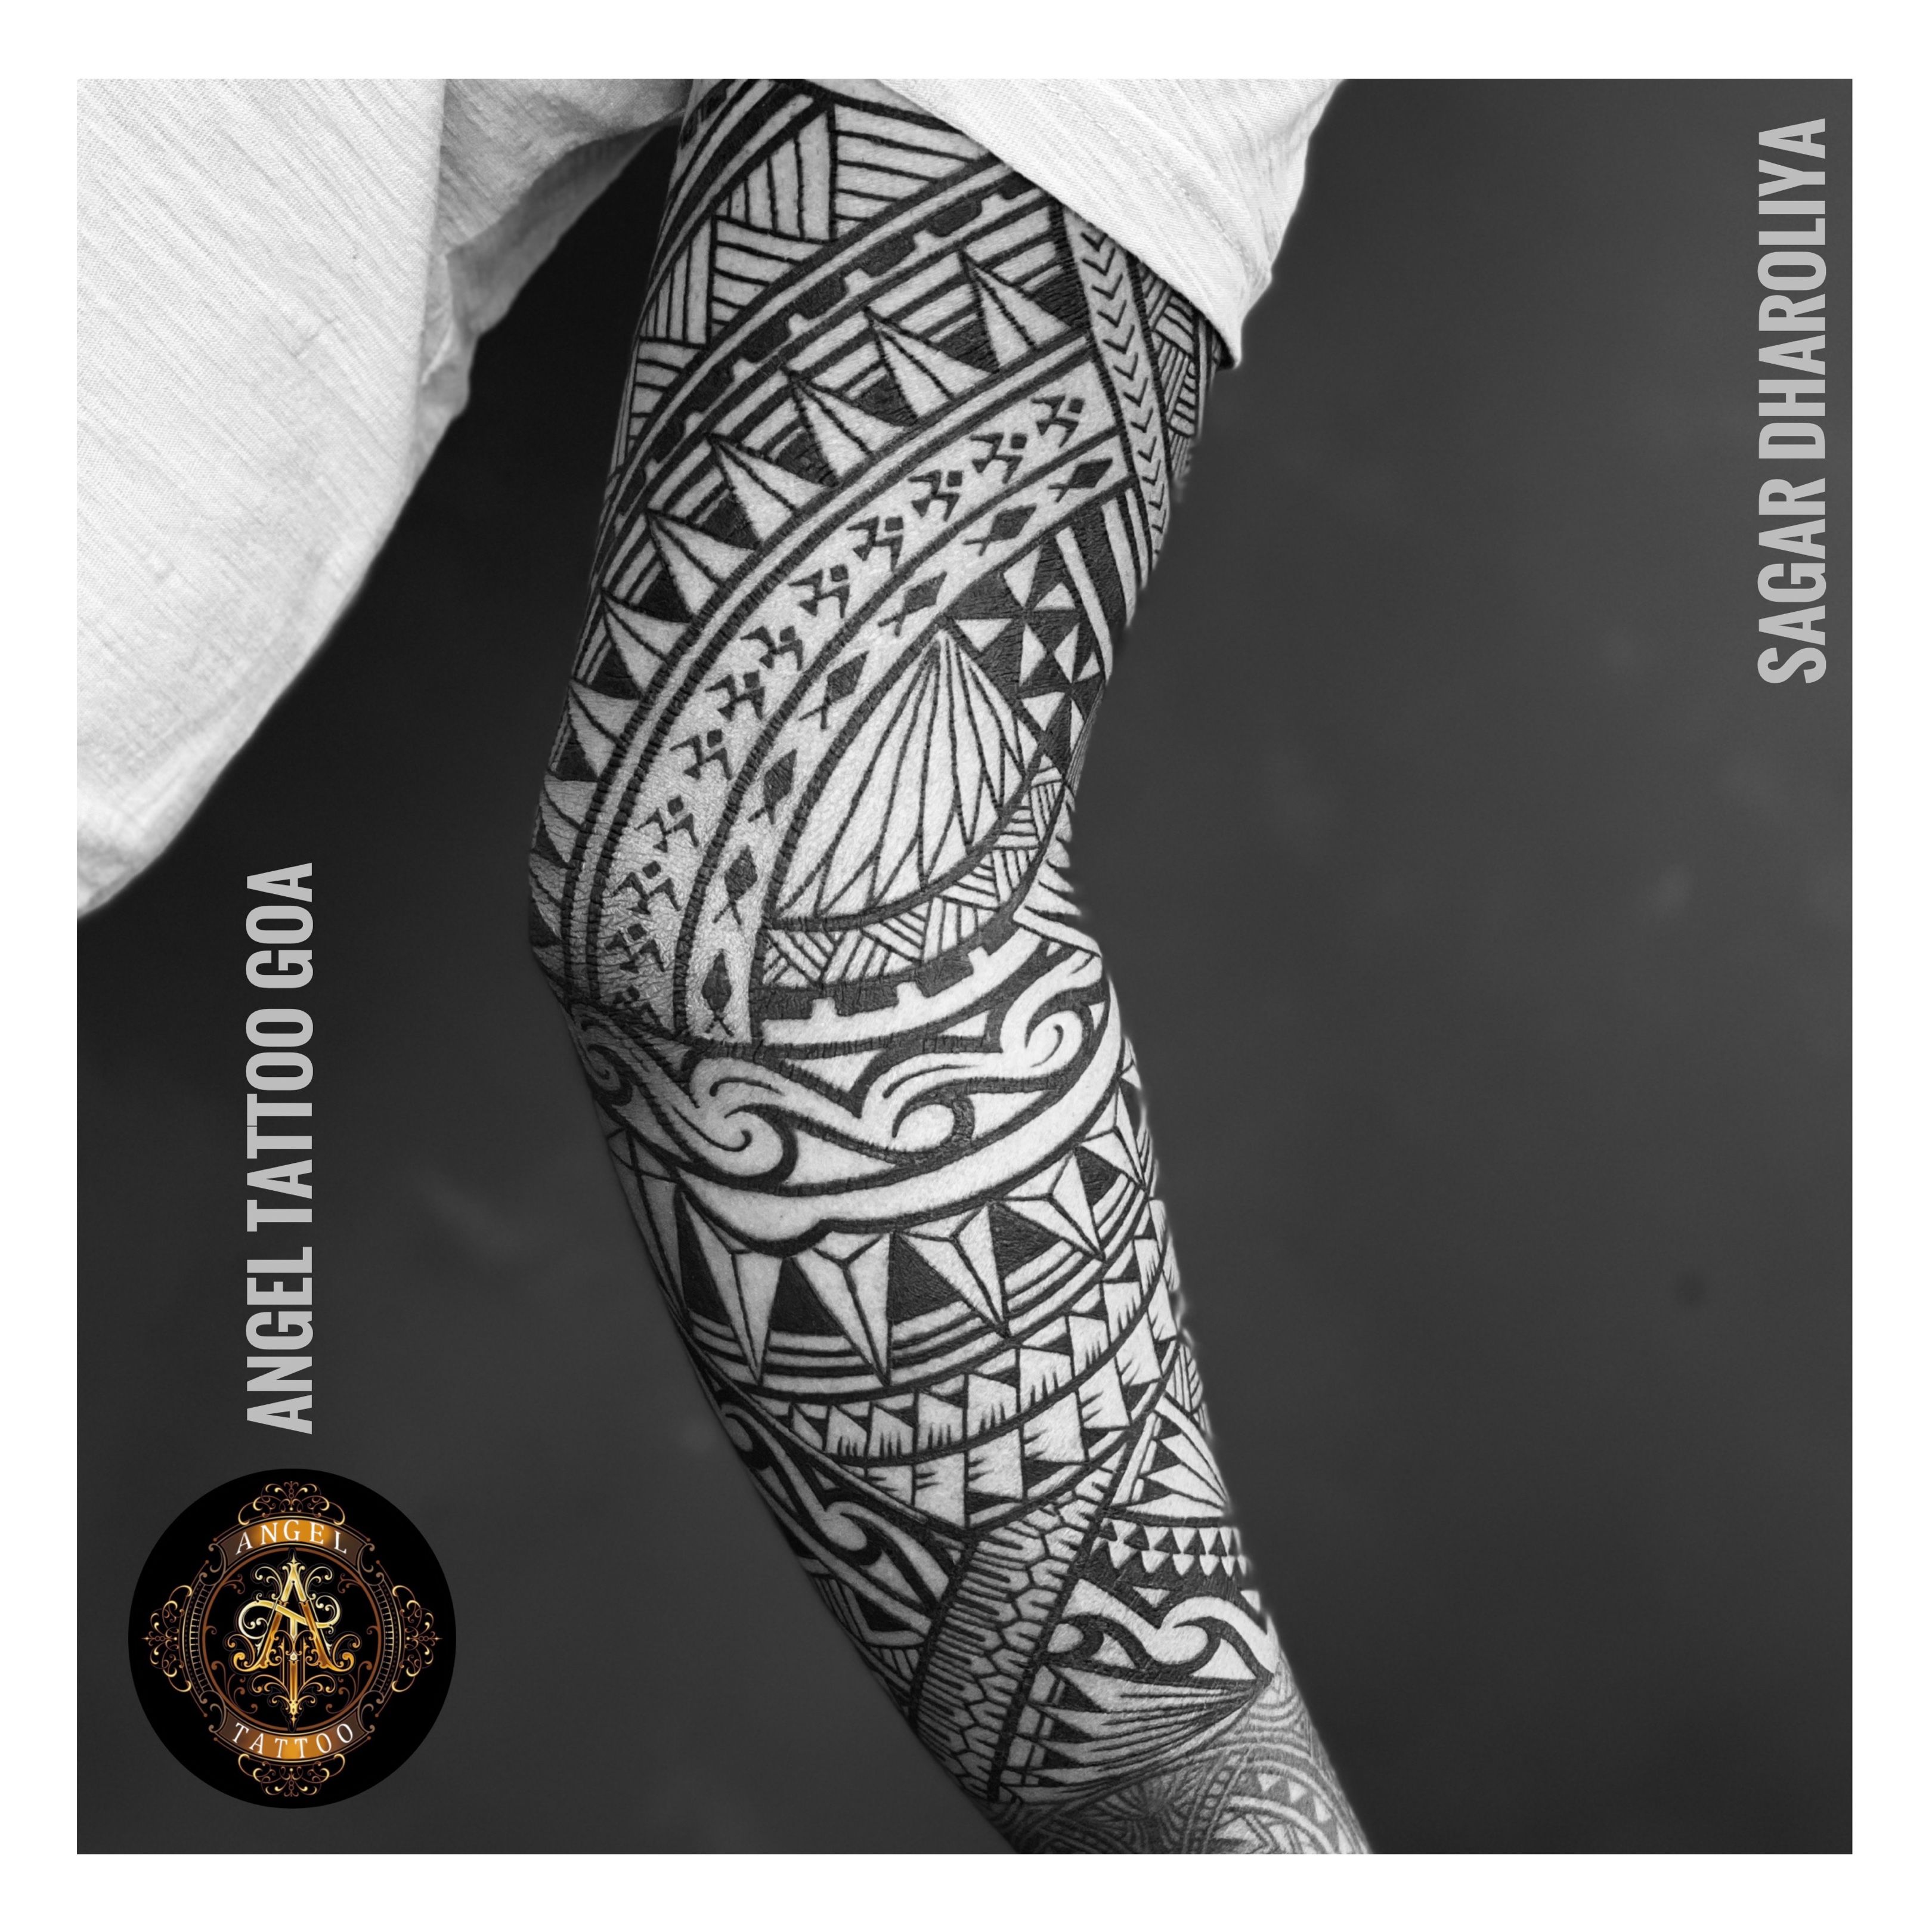 Maori Tribal Style Tattoo Pattern Fit For A Leg Or Arm Hand Shoulder Stock  Illustration - Download Image Now - iStock